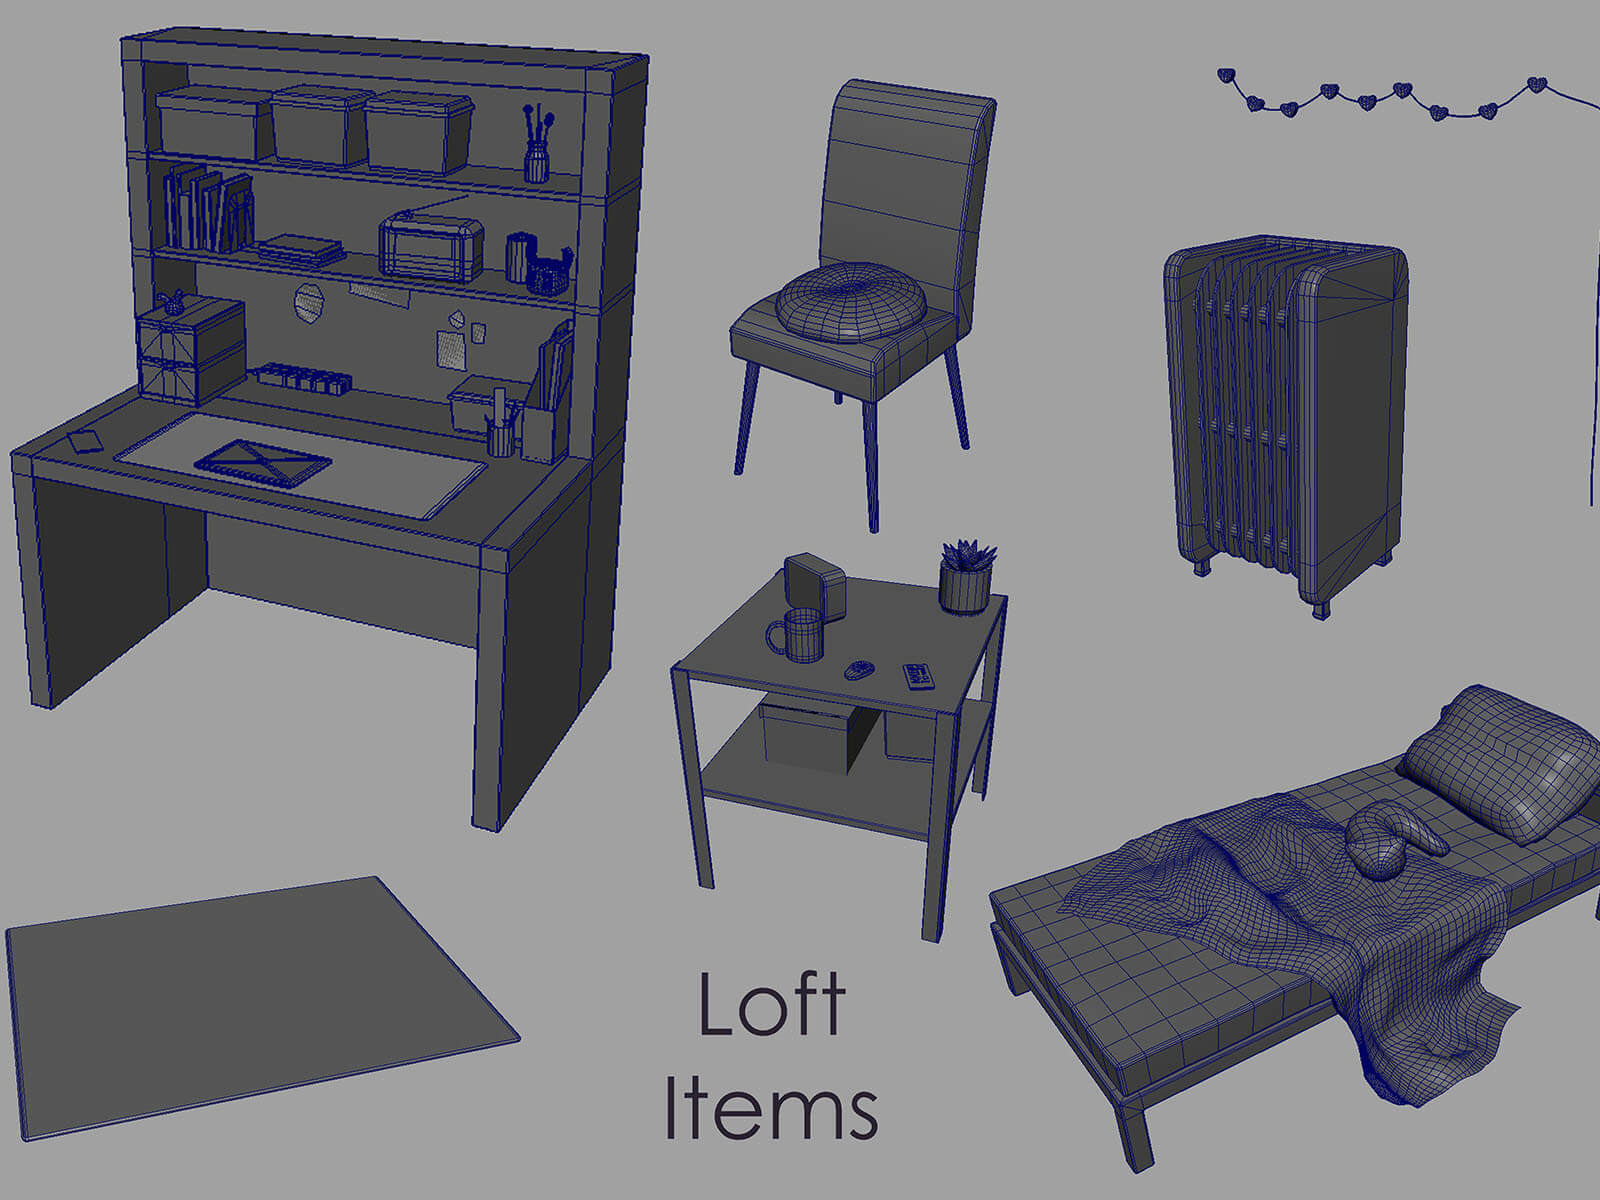 Collection of untextured 3D objects used in the scene's loft area.